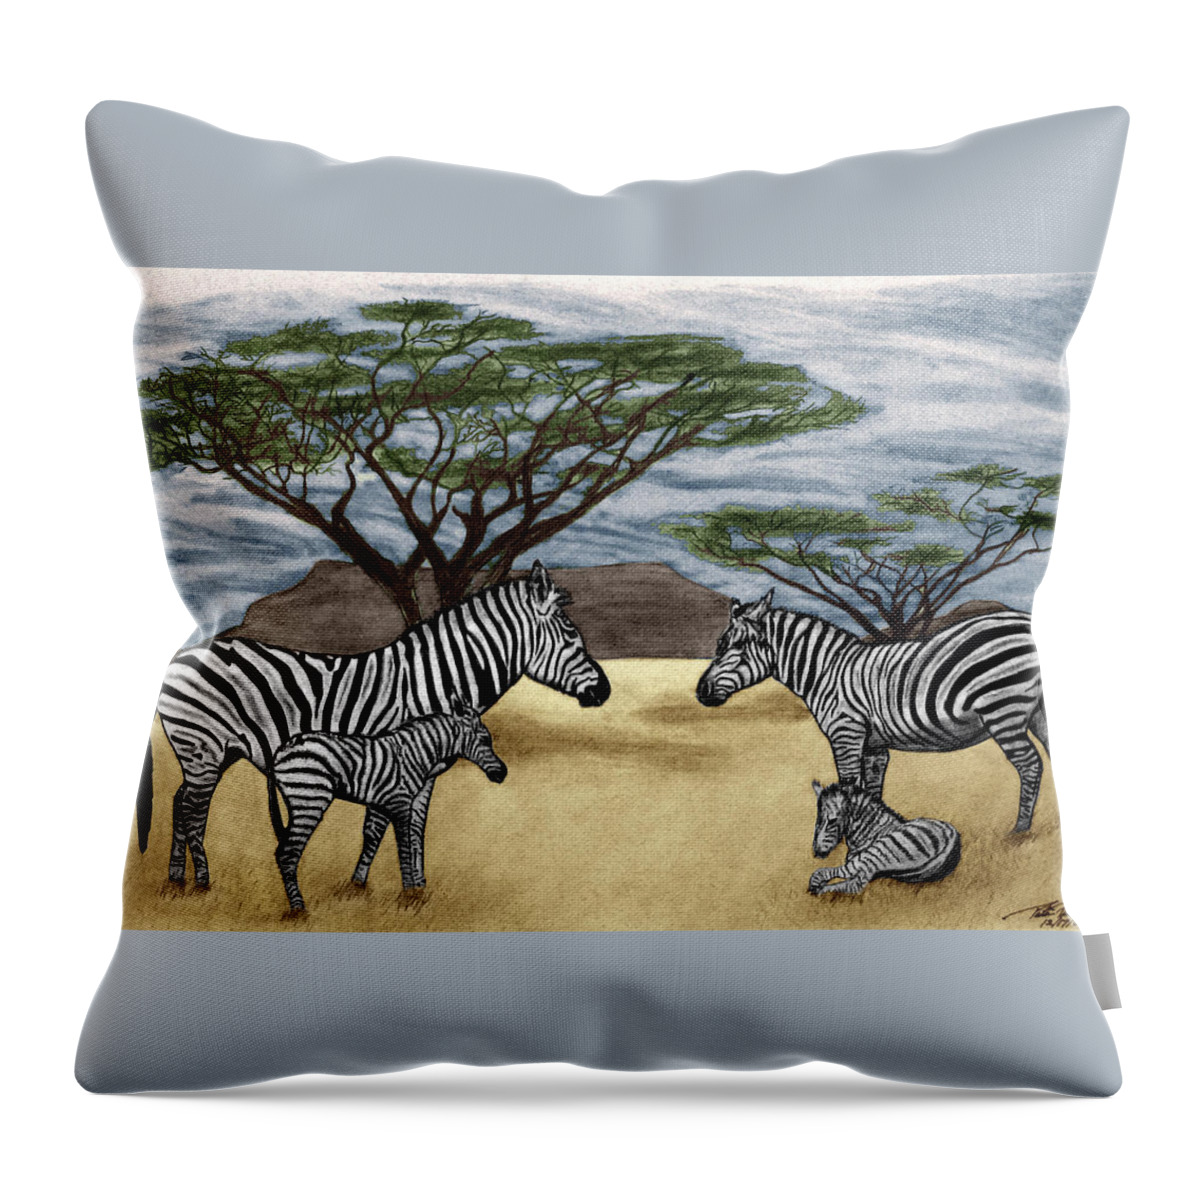 Zebra African Outback Throw Pillow featuring the drawing Zebra African Outback #2 by Peter Piatt